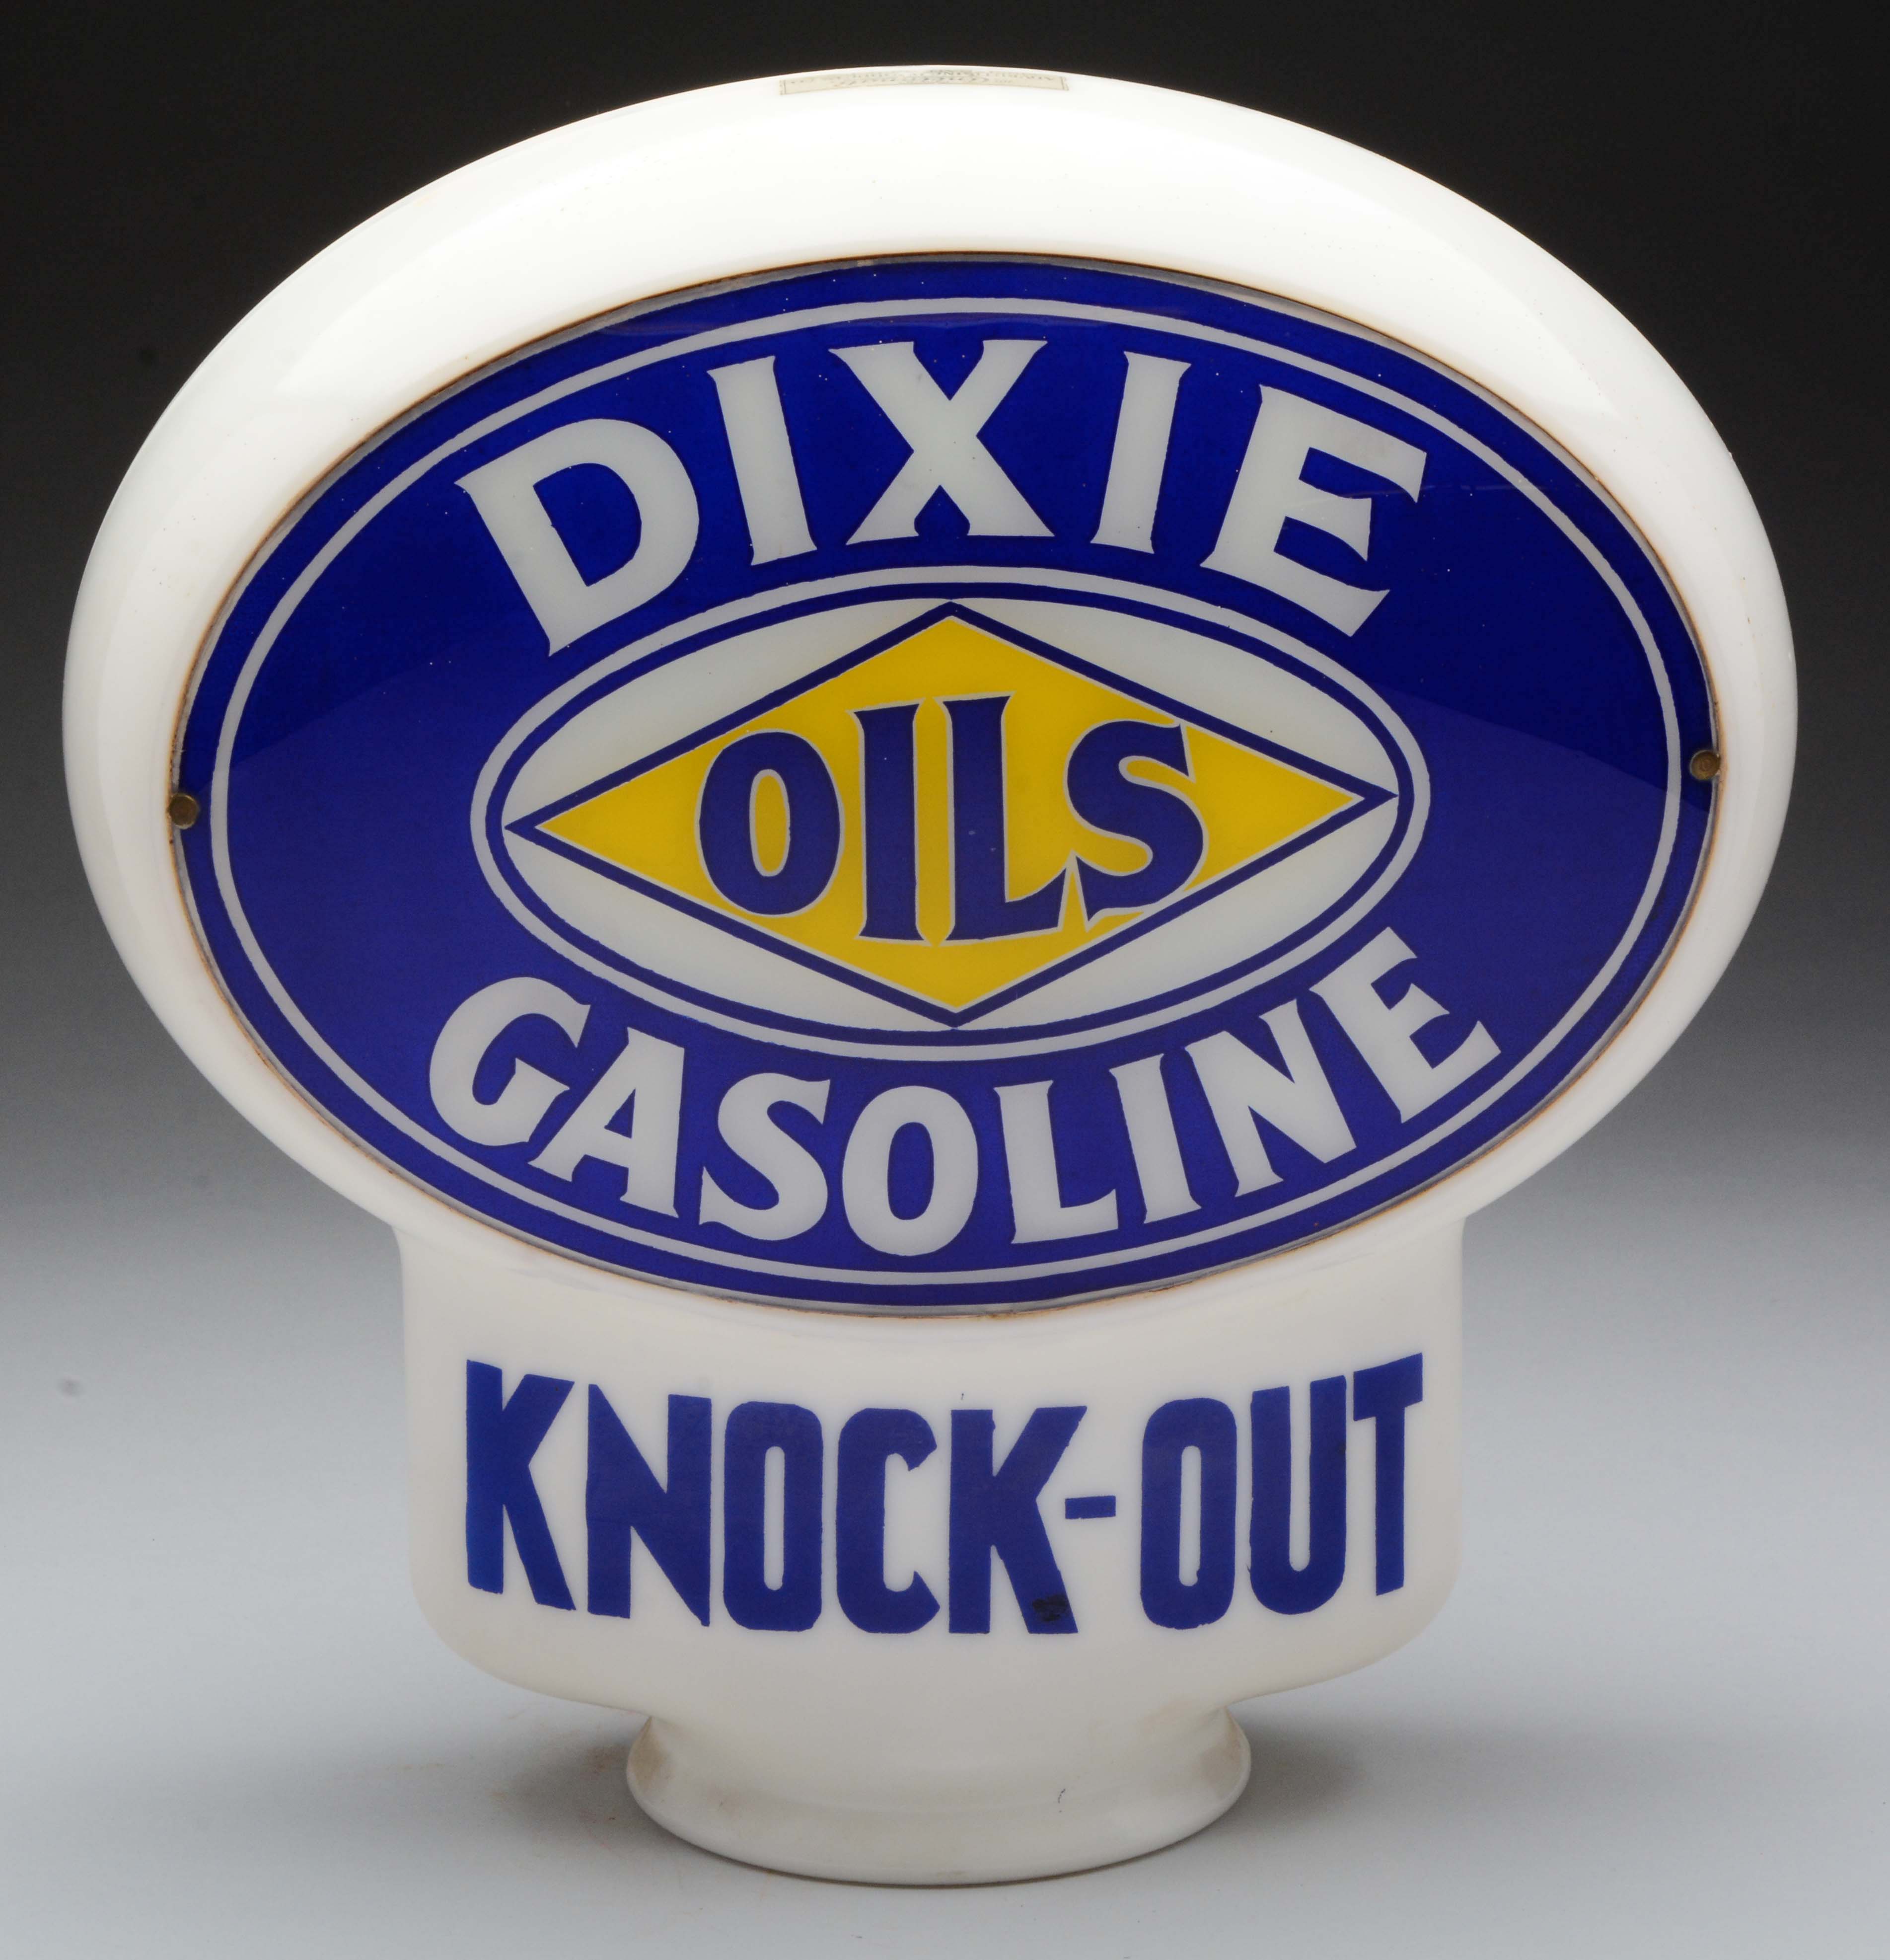 Dixie Gasoline Knock-Out Keyhole Globe, estimated at $7,000-12,000.